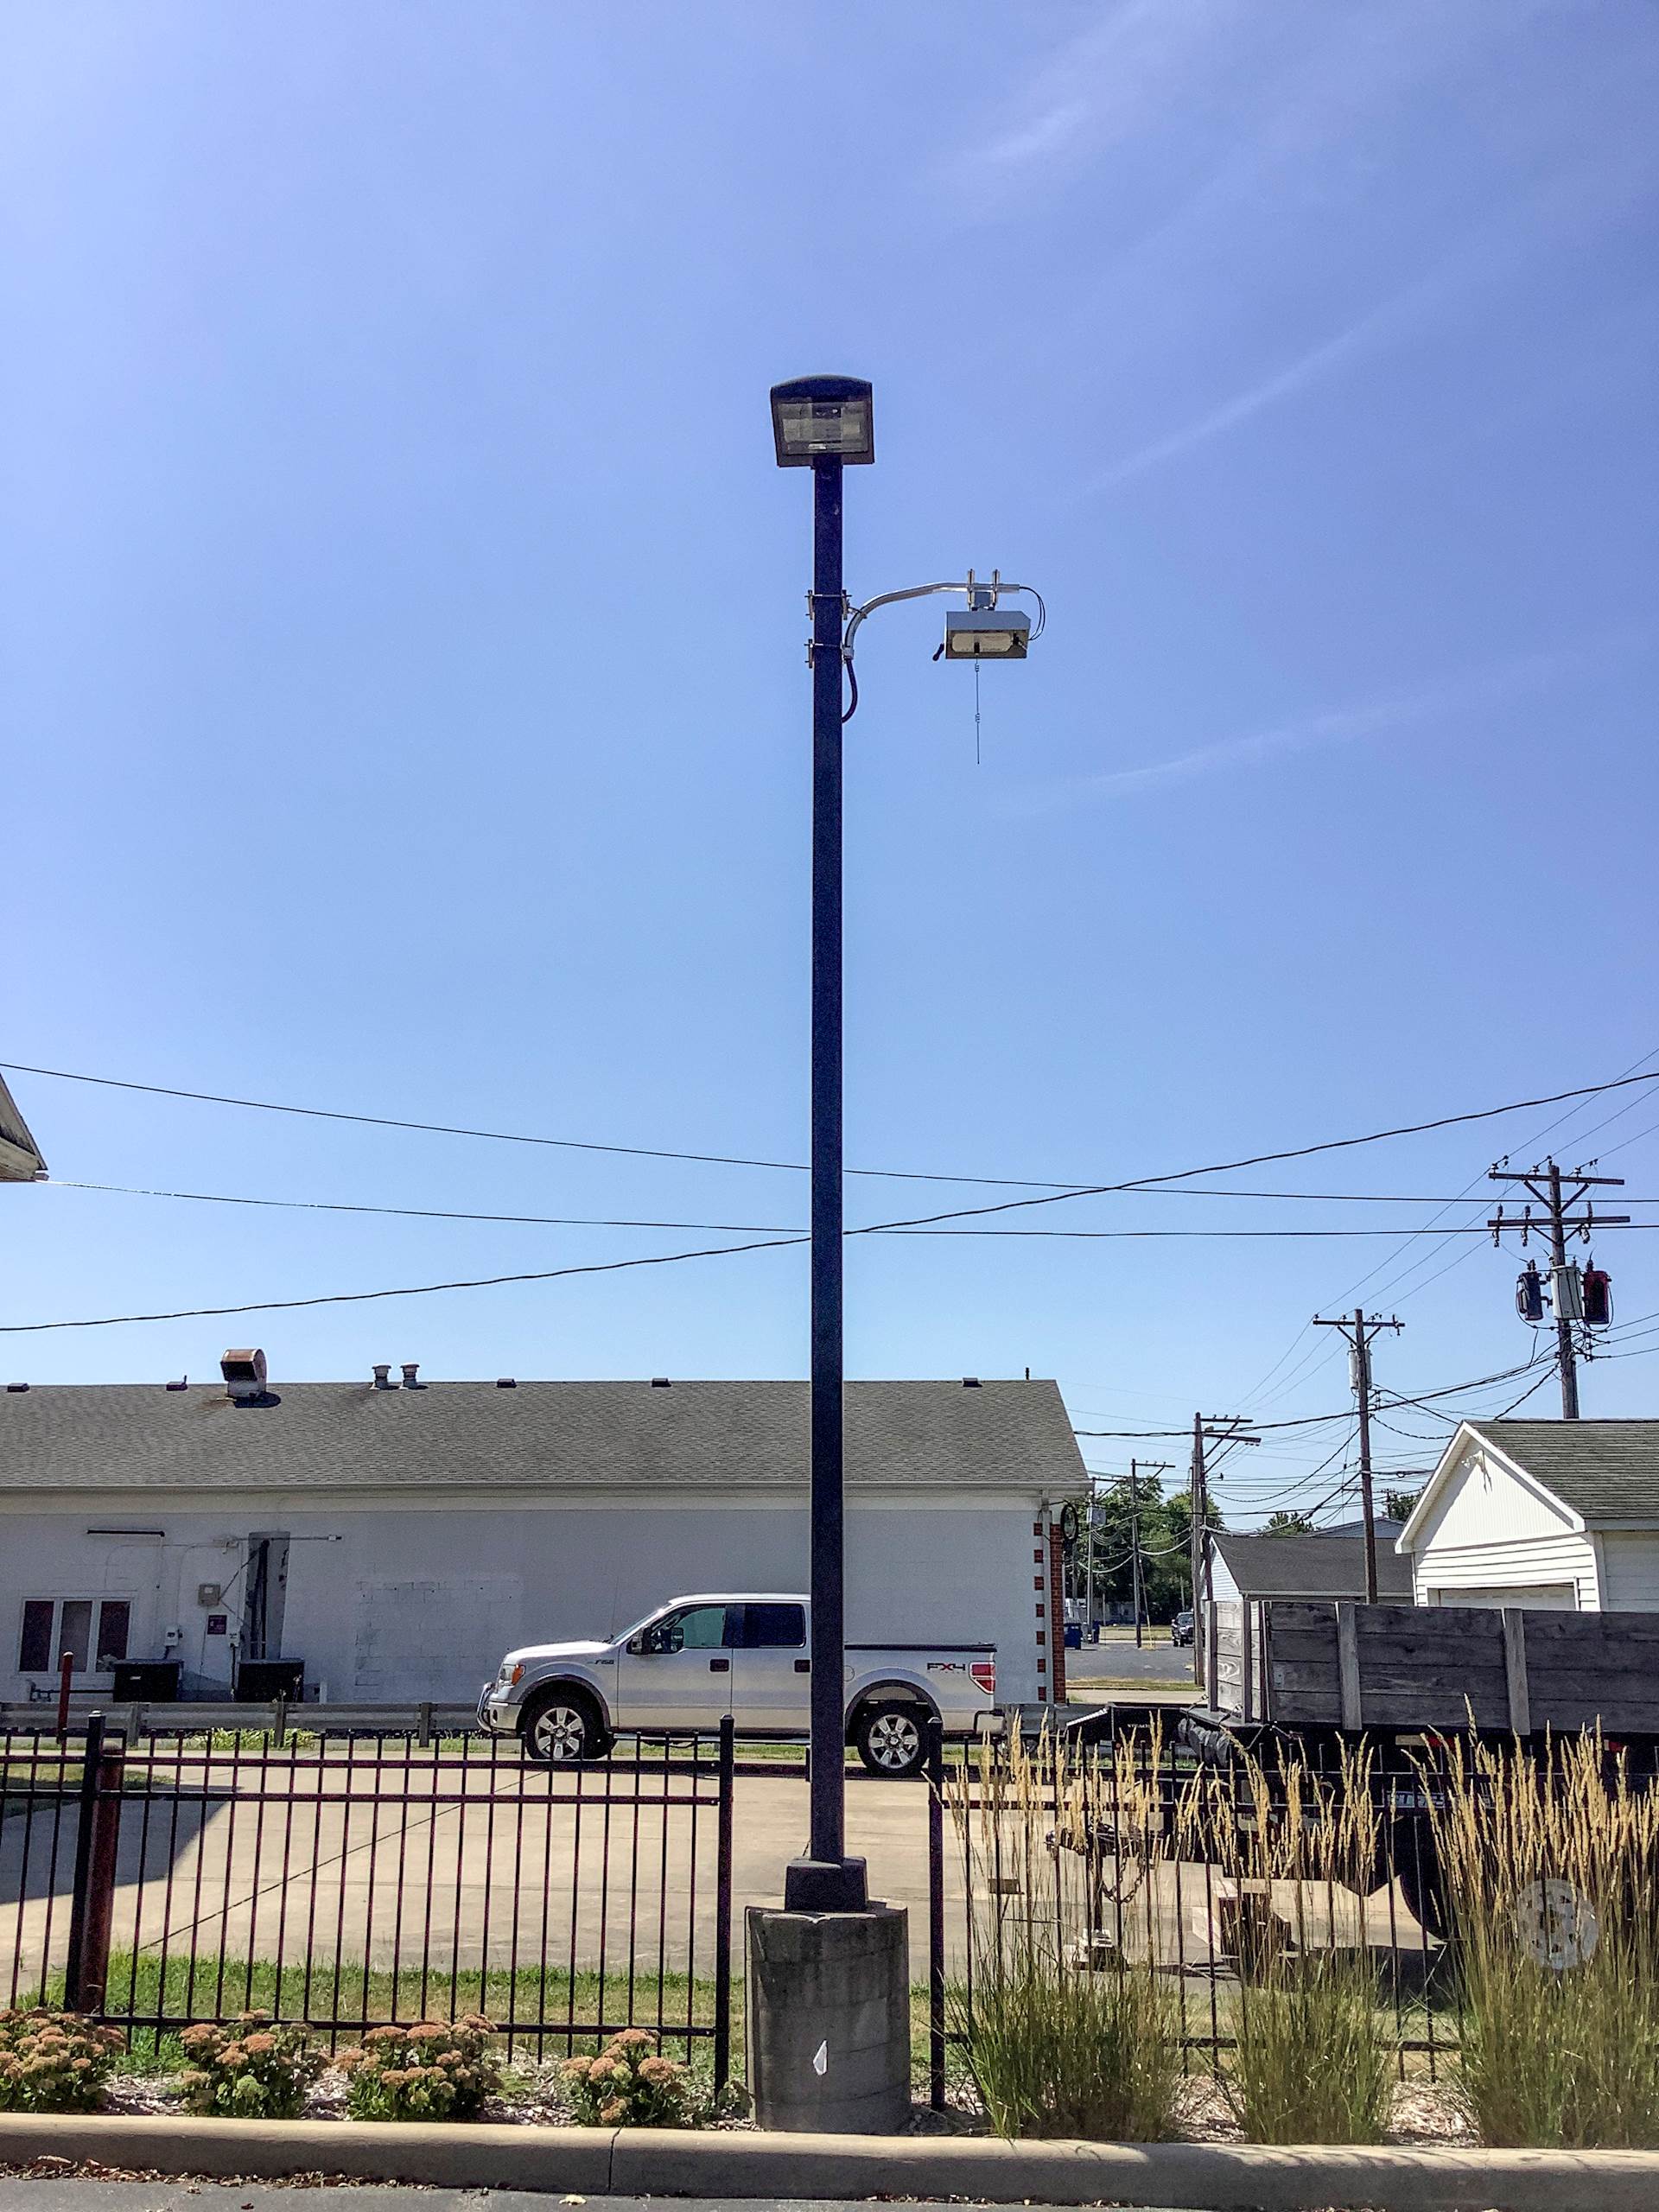 A light pole with a data collection device at the top. The light pole is between two parking lots, with a small commercial building and an alley in the background.